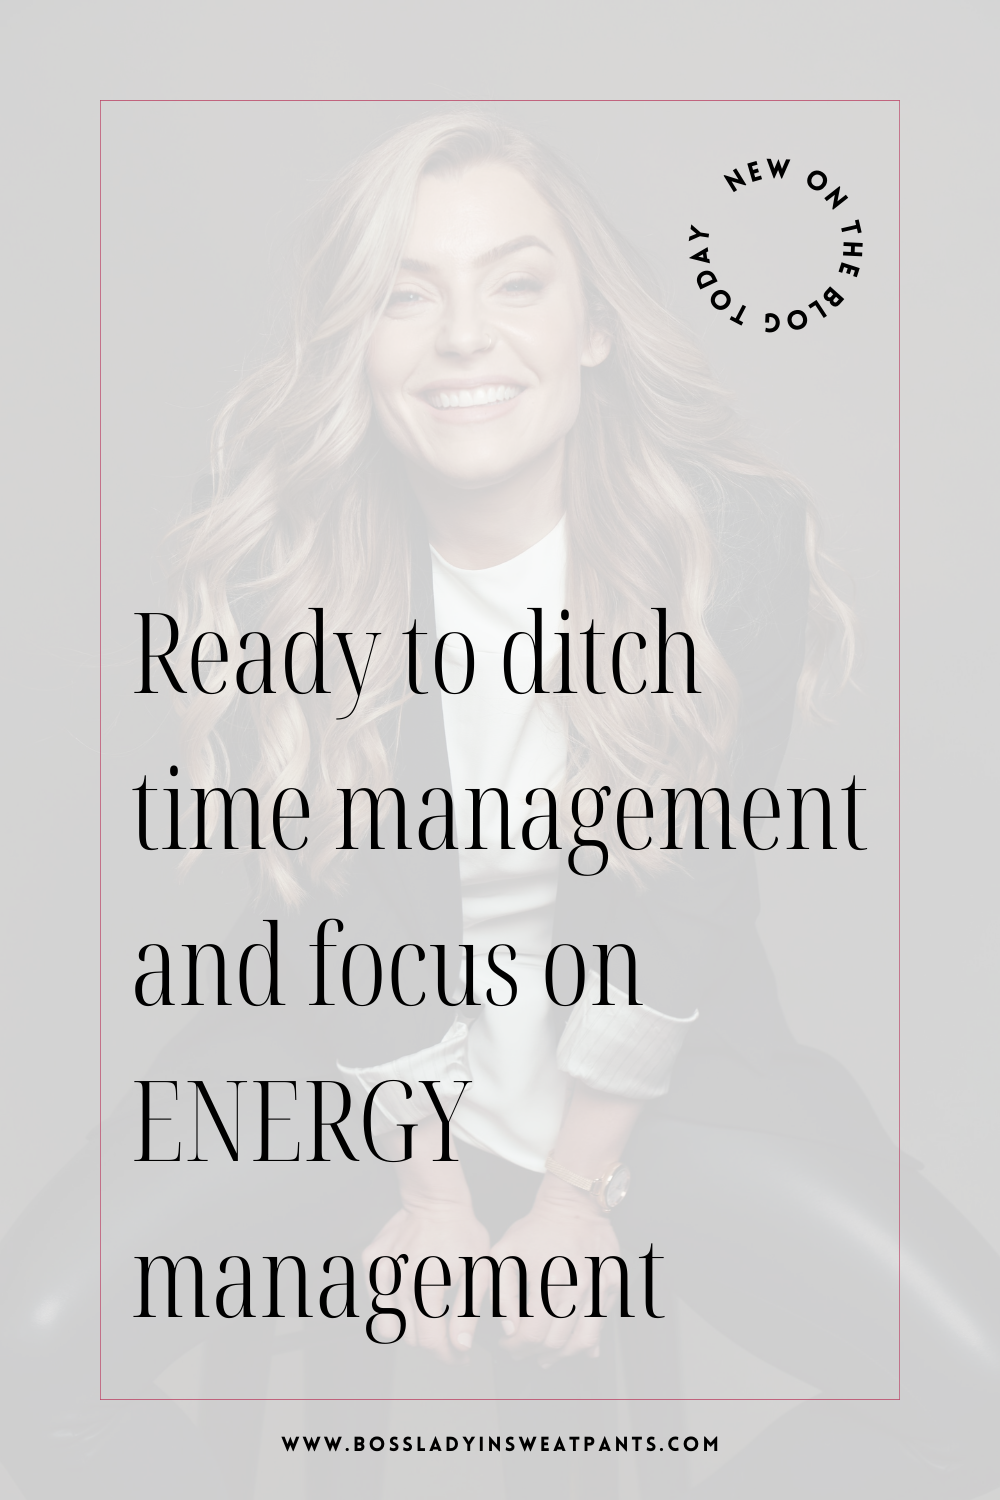 blurred photo of a woman with long hair (Heather Chauvin) with text: ready to ditch time management and focus on energy management